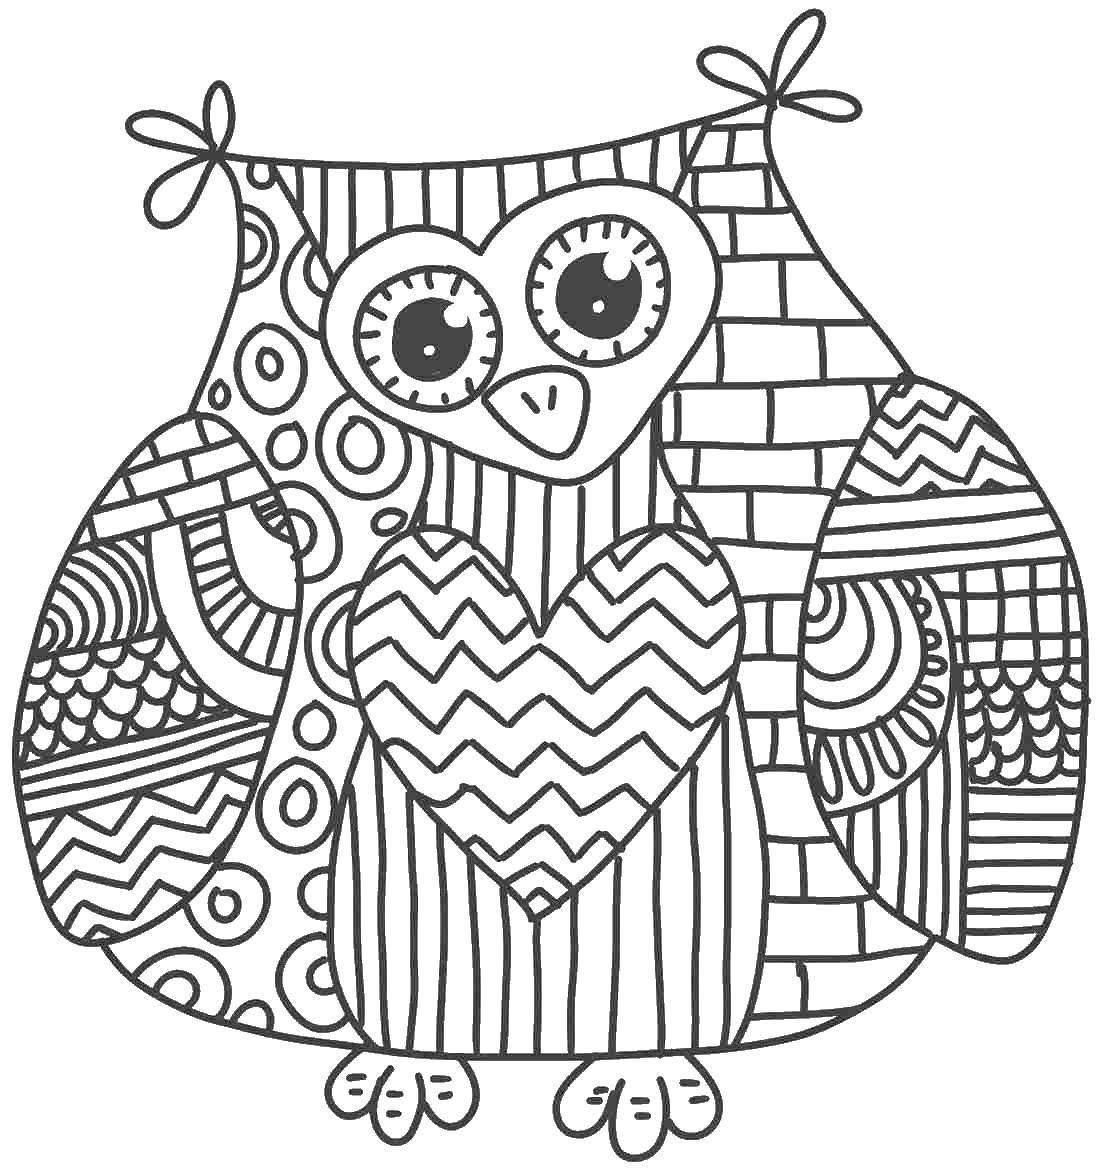 Coloring Cool owl. Category Bathroom with shower. Tags:  Bathroom with shower.